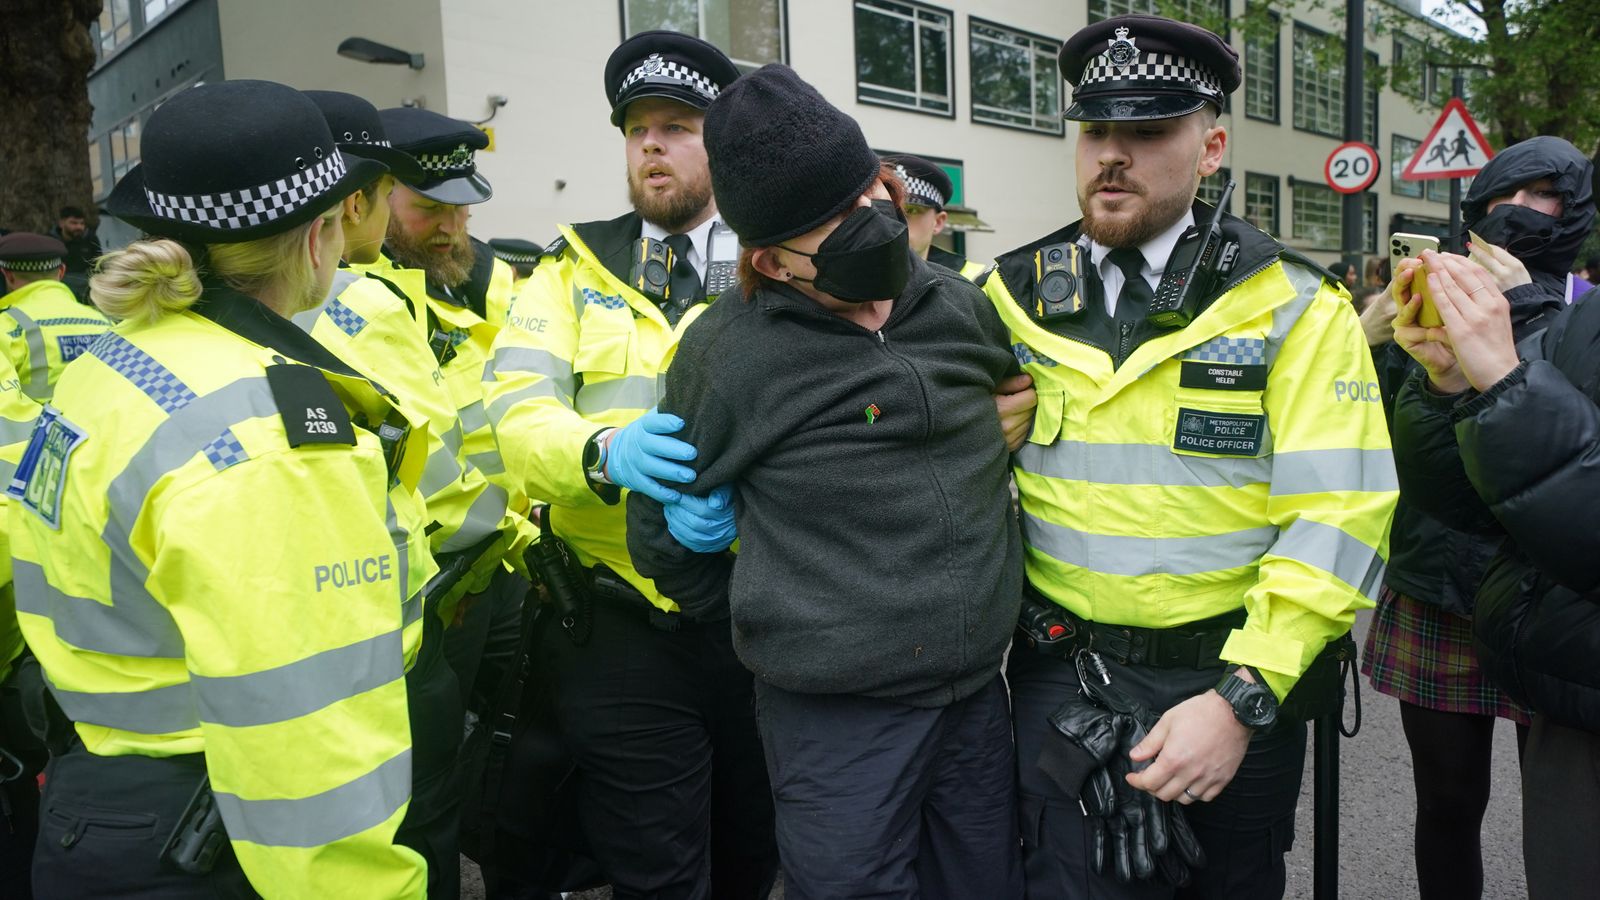 45 arrests in bibby stockholm protest in london - as coach leaves without asylum seekers